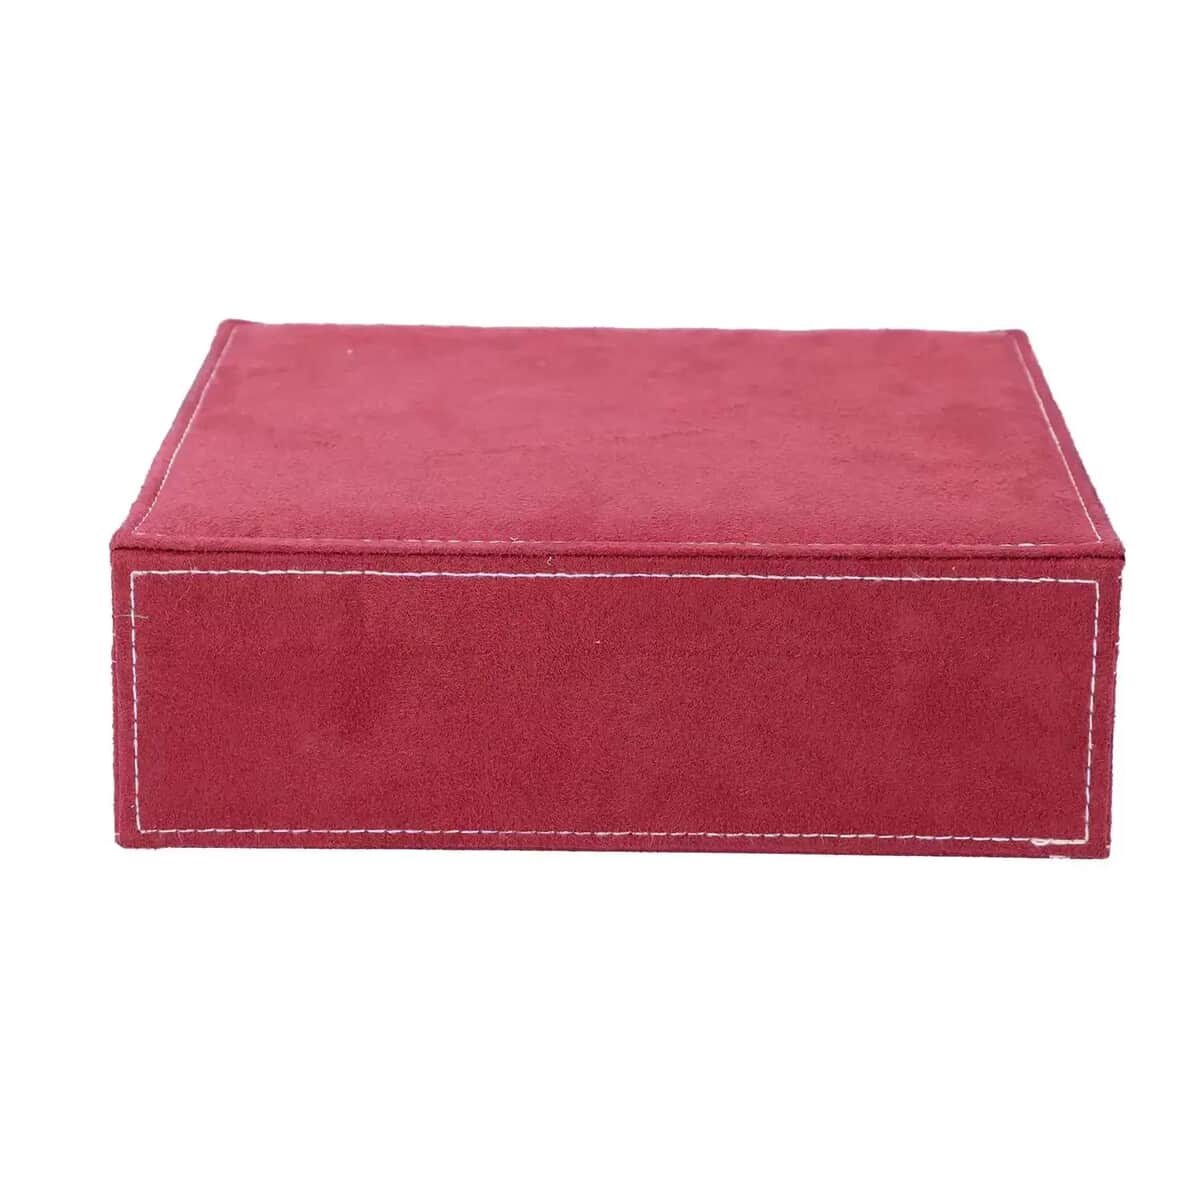 Burgundy Faux Velvet Briefcase Style 2-tier Jewelry Box, Scratch resistant and Anti-Tarnish Jewelry Storage Box, Anti Tarnish Jewelry Case, Jewelry Organizer (Approx 60 Rings, etc.) image number 5